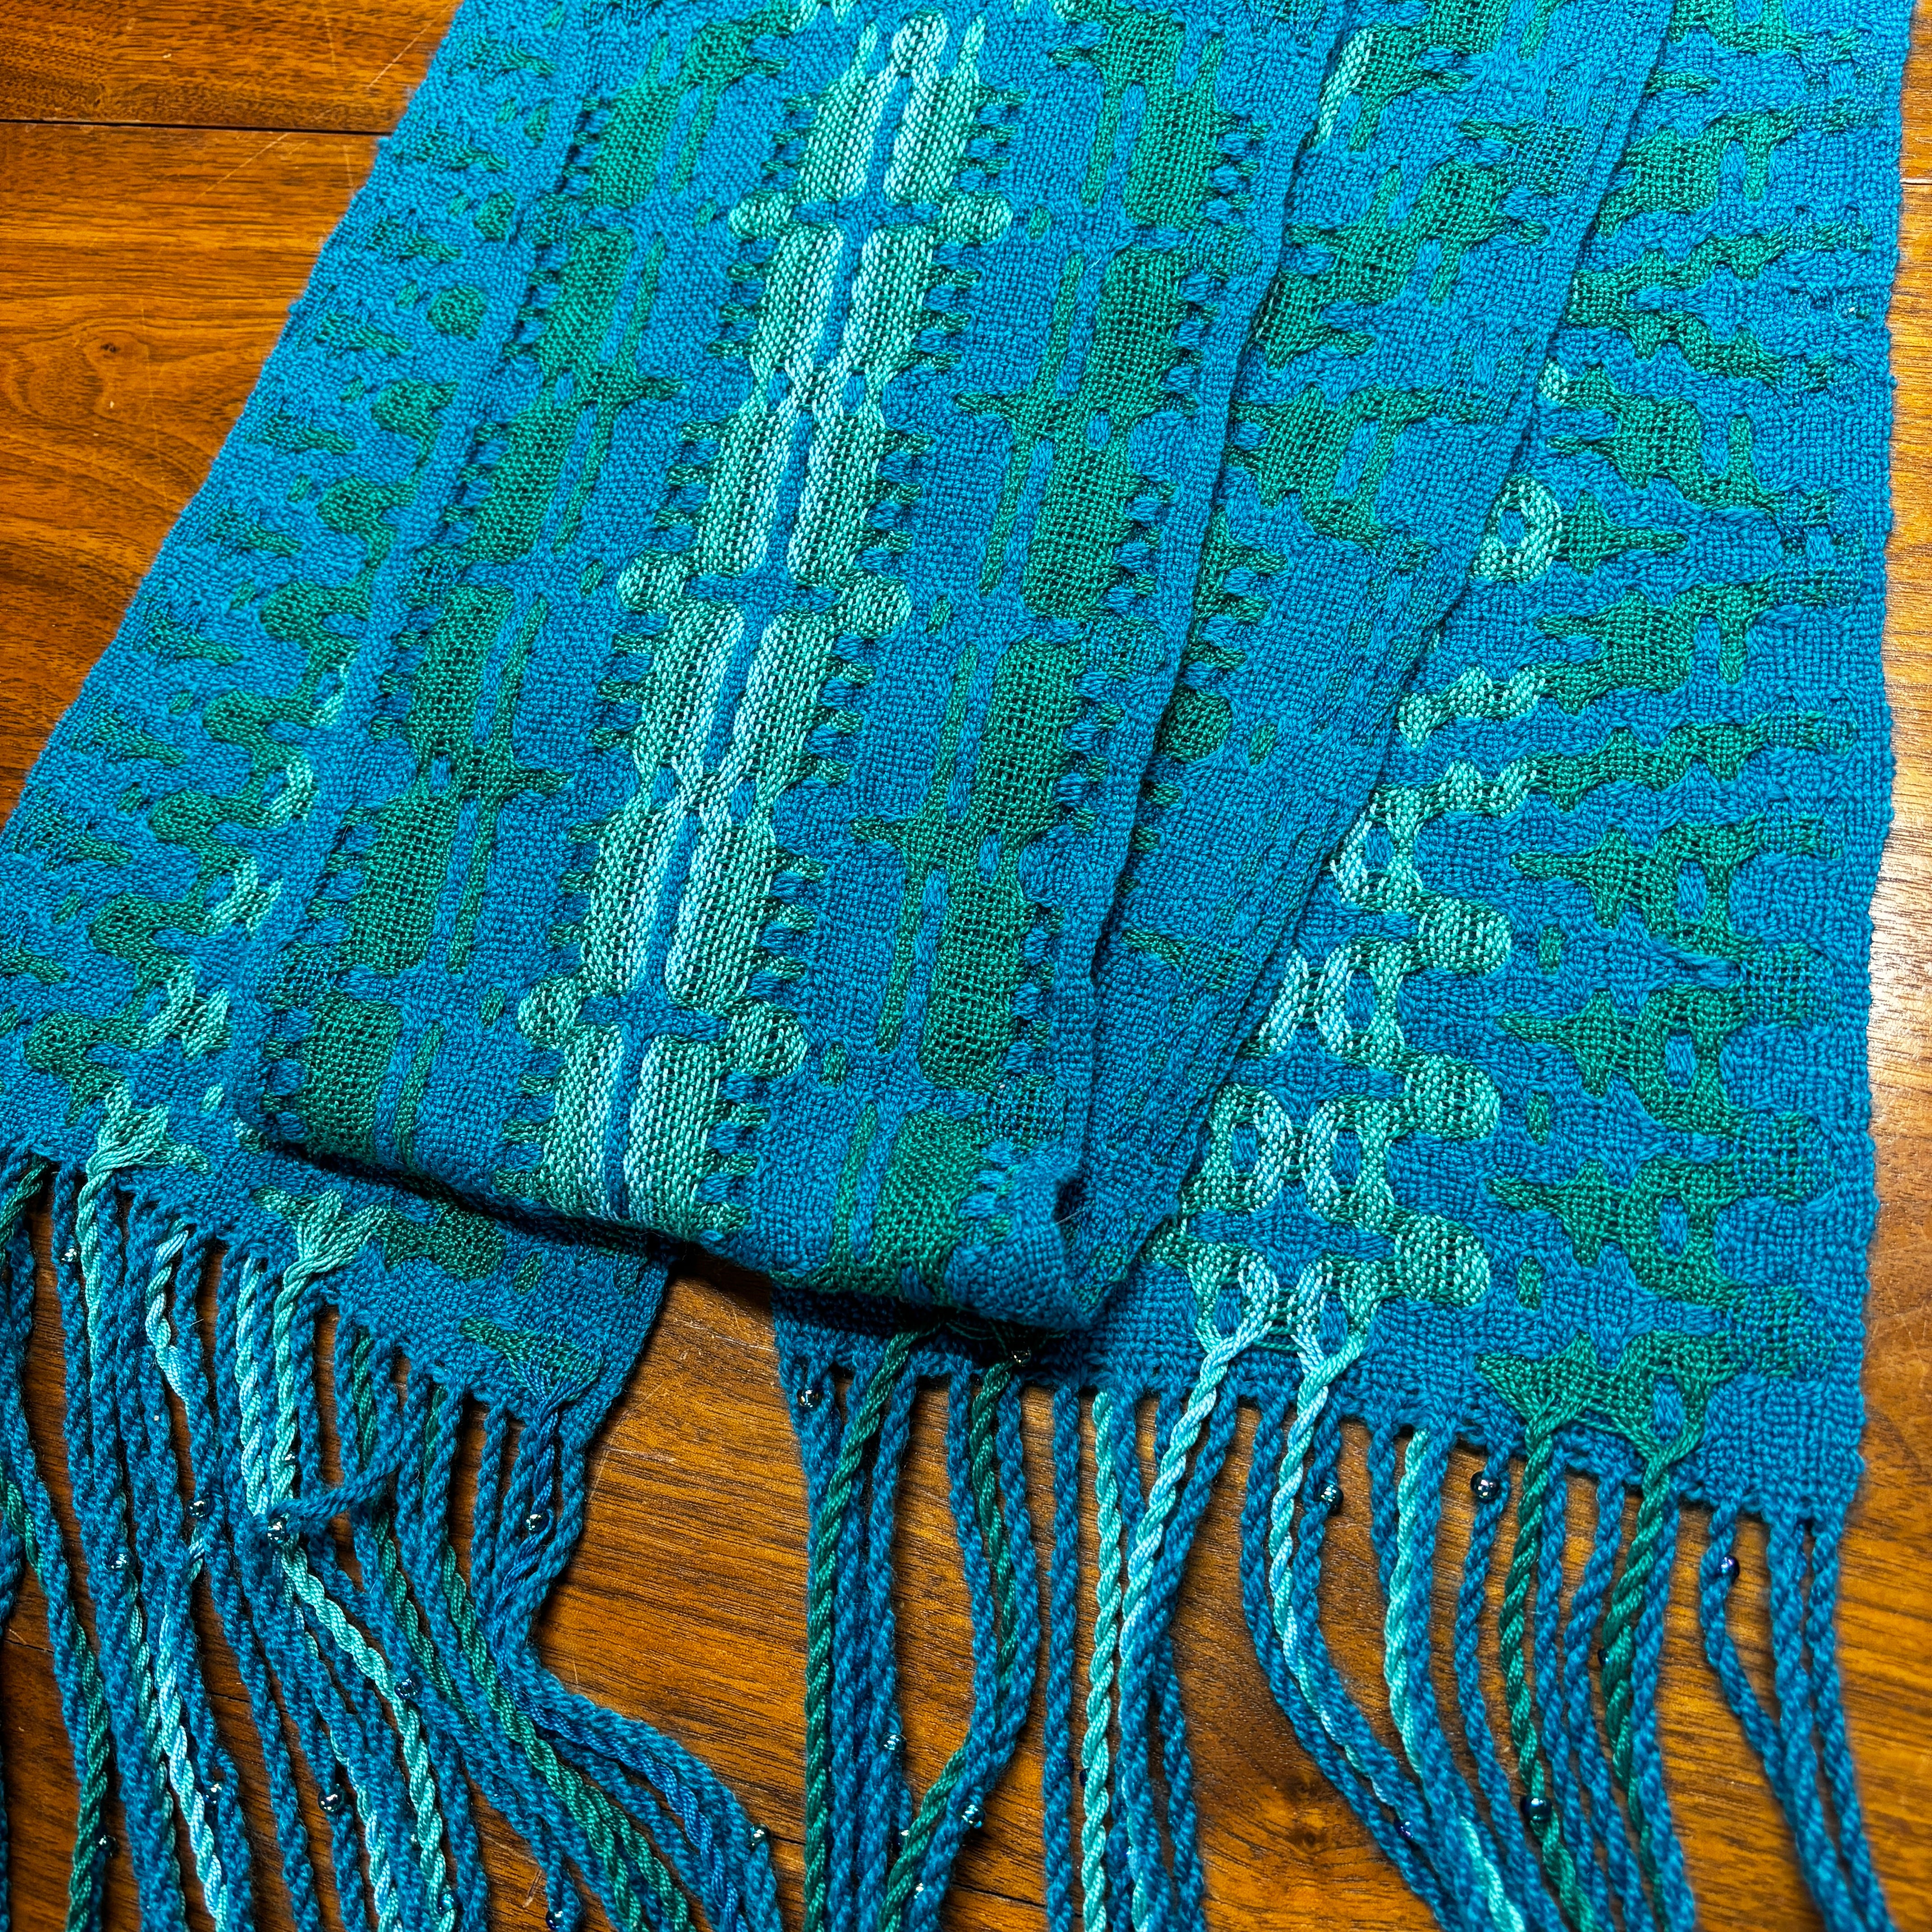 woven scarf in blue and green yarn